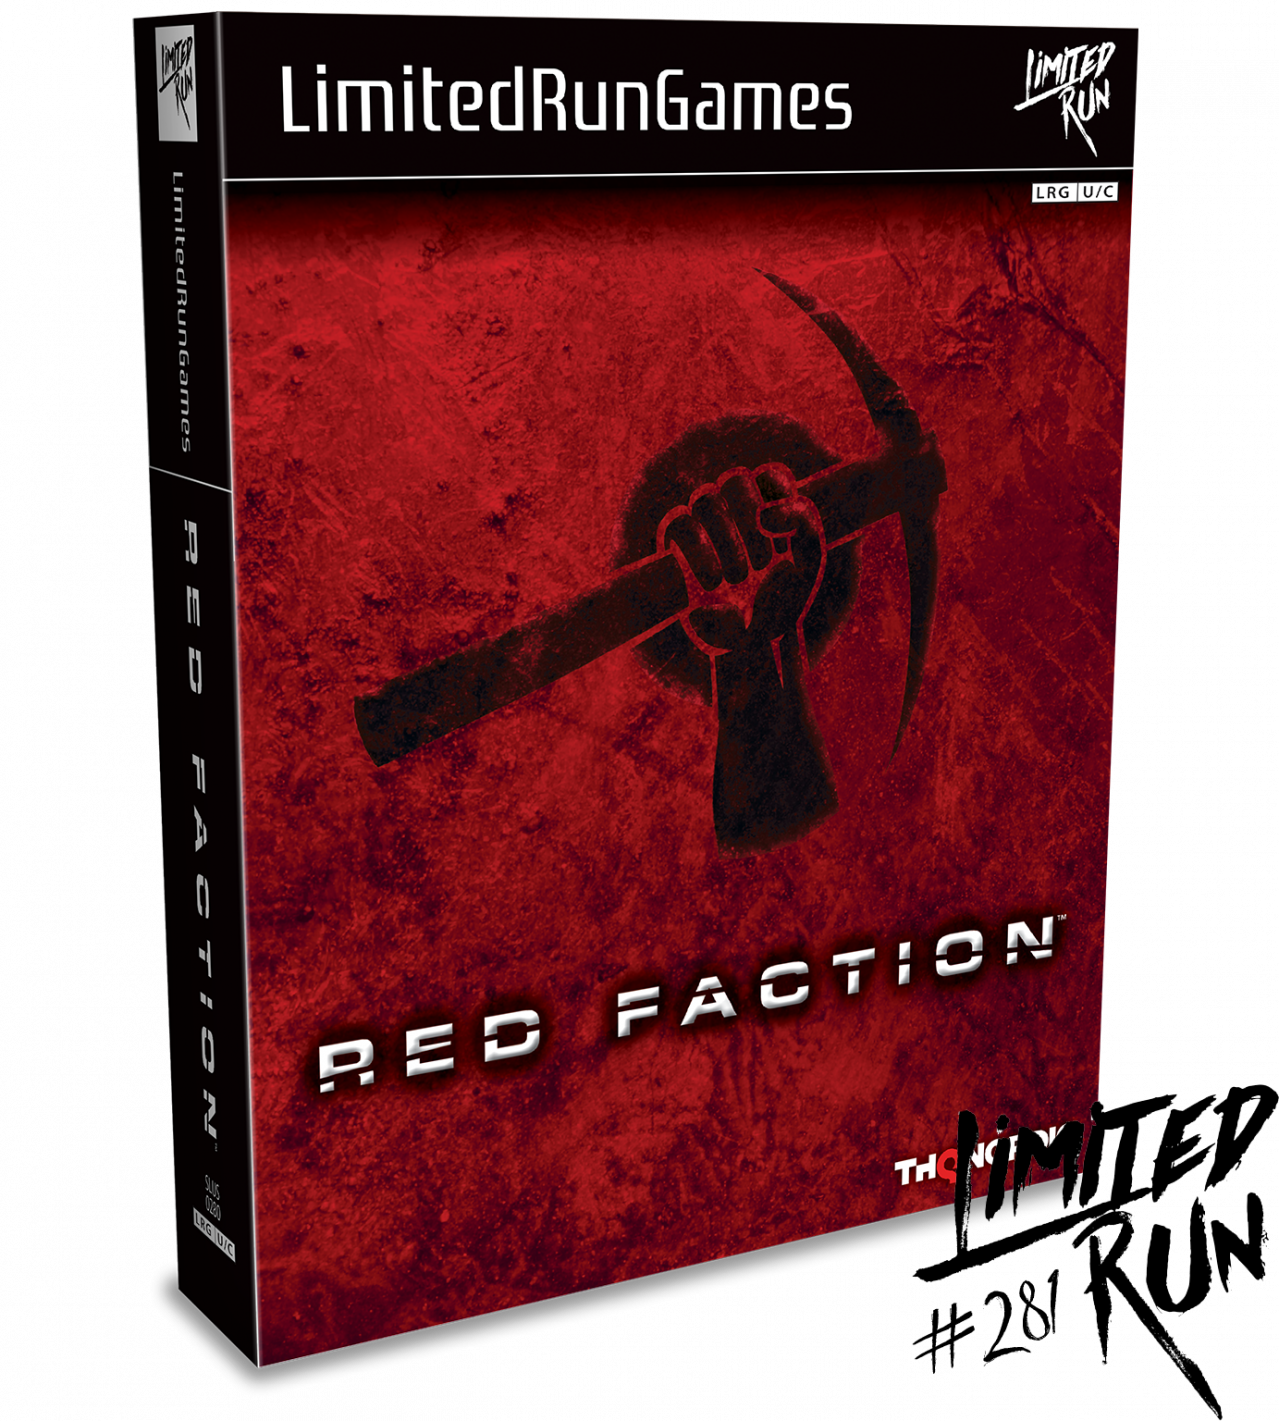 Red Faction Classic Edition PS4 - Limited Run Games - Steelbook